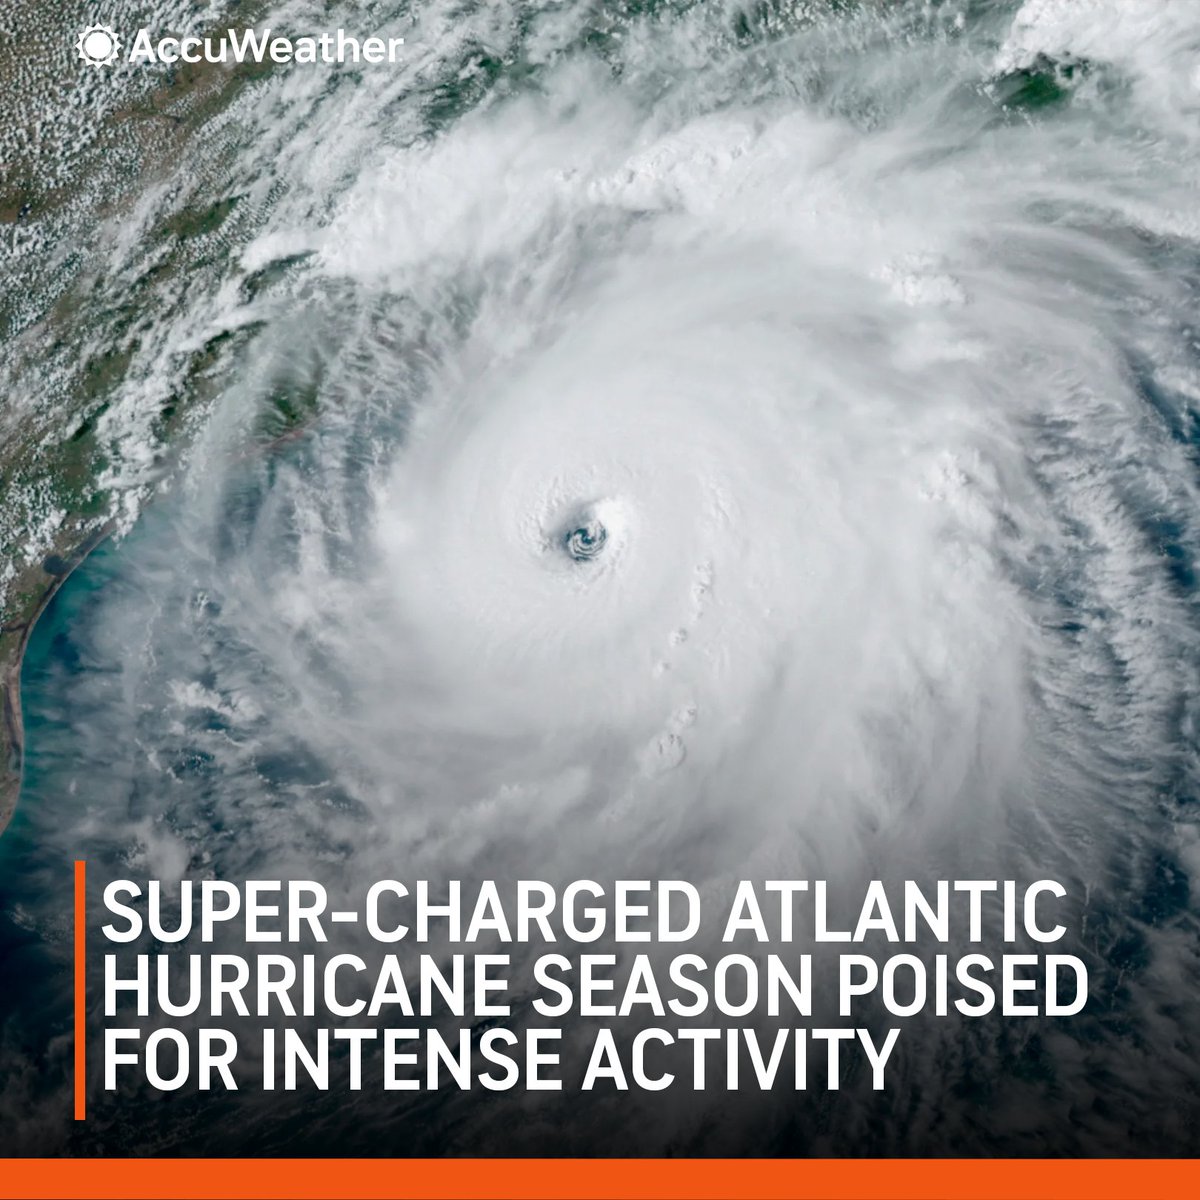 Saturday marks the beginning of the Atlantic hurricane season, which is forecast to feature 20 to 25 named storms, including 8-12 hurricanes. 🌀

This exceeds the 30-year historical average of 14 named storms and 7 hurricanes.

Full forecast details: bit.ly/3WX5HD7